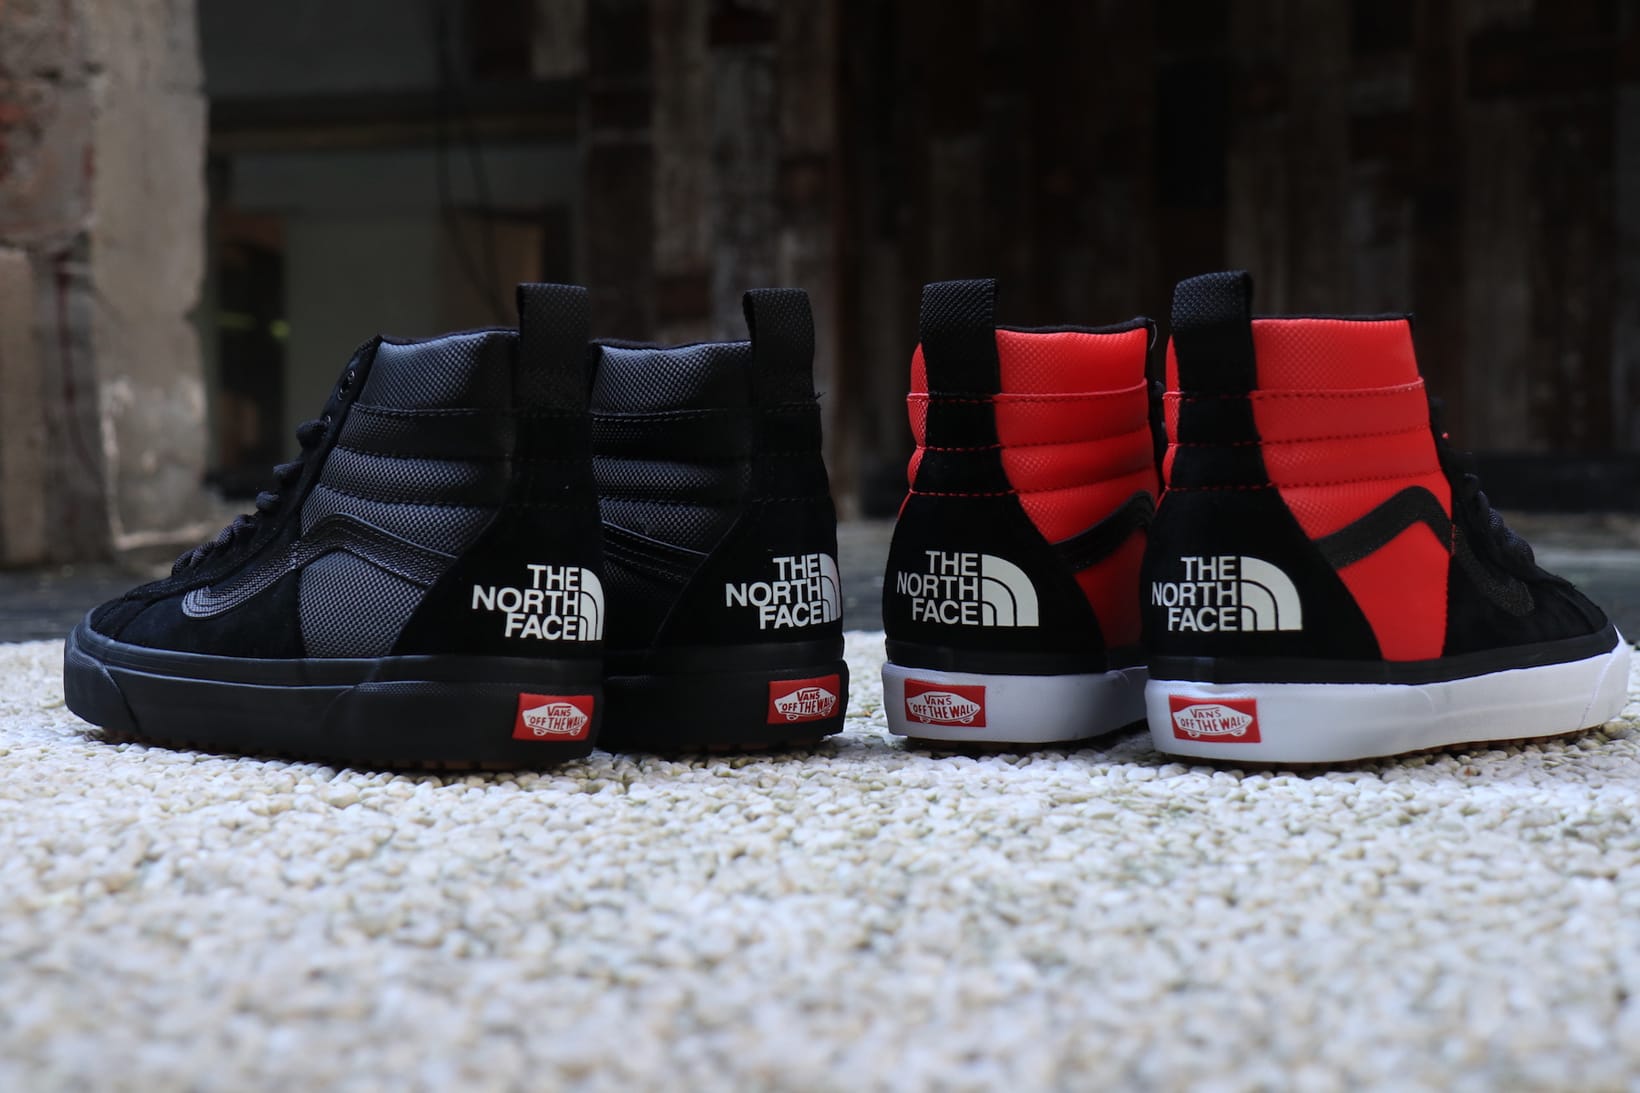 The North Face x Vans 2017 Fall Collection | HYPEBEAST أوريو